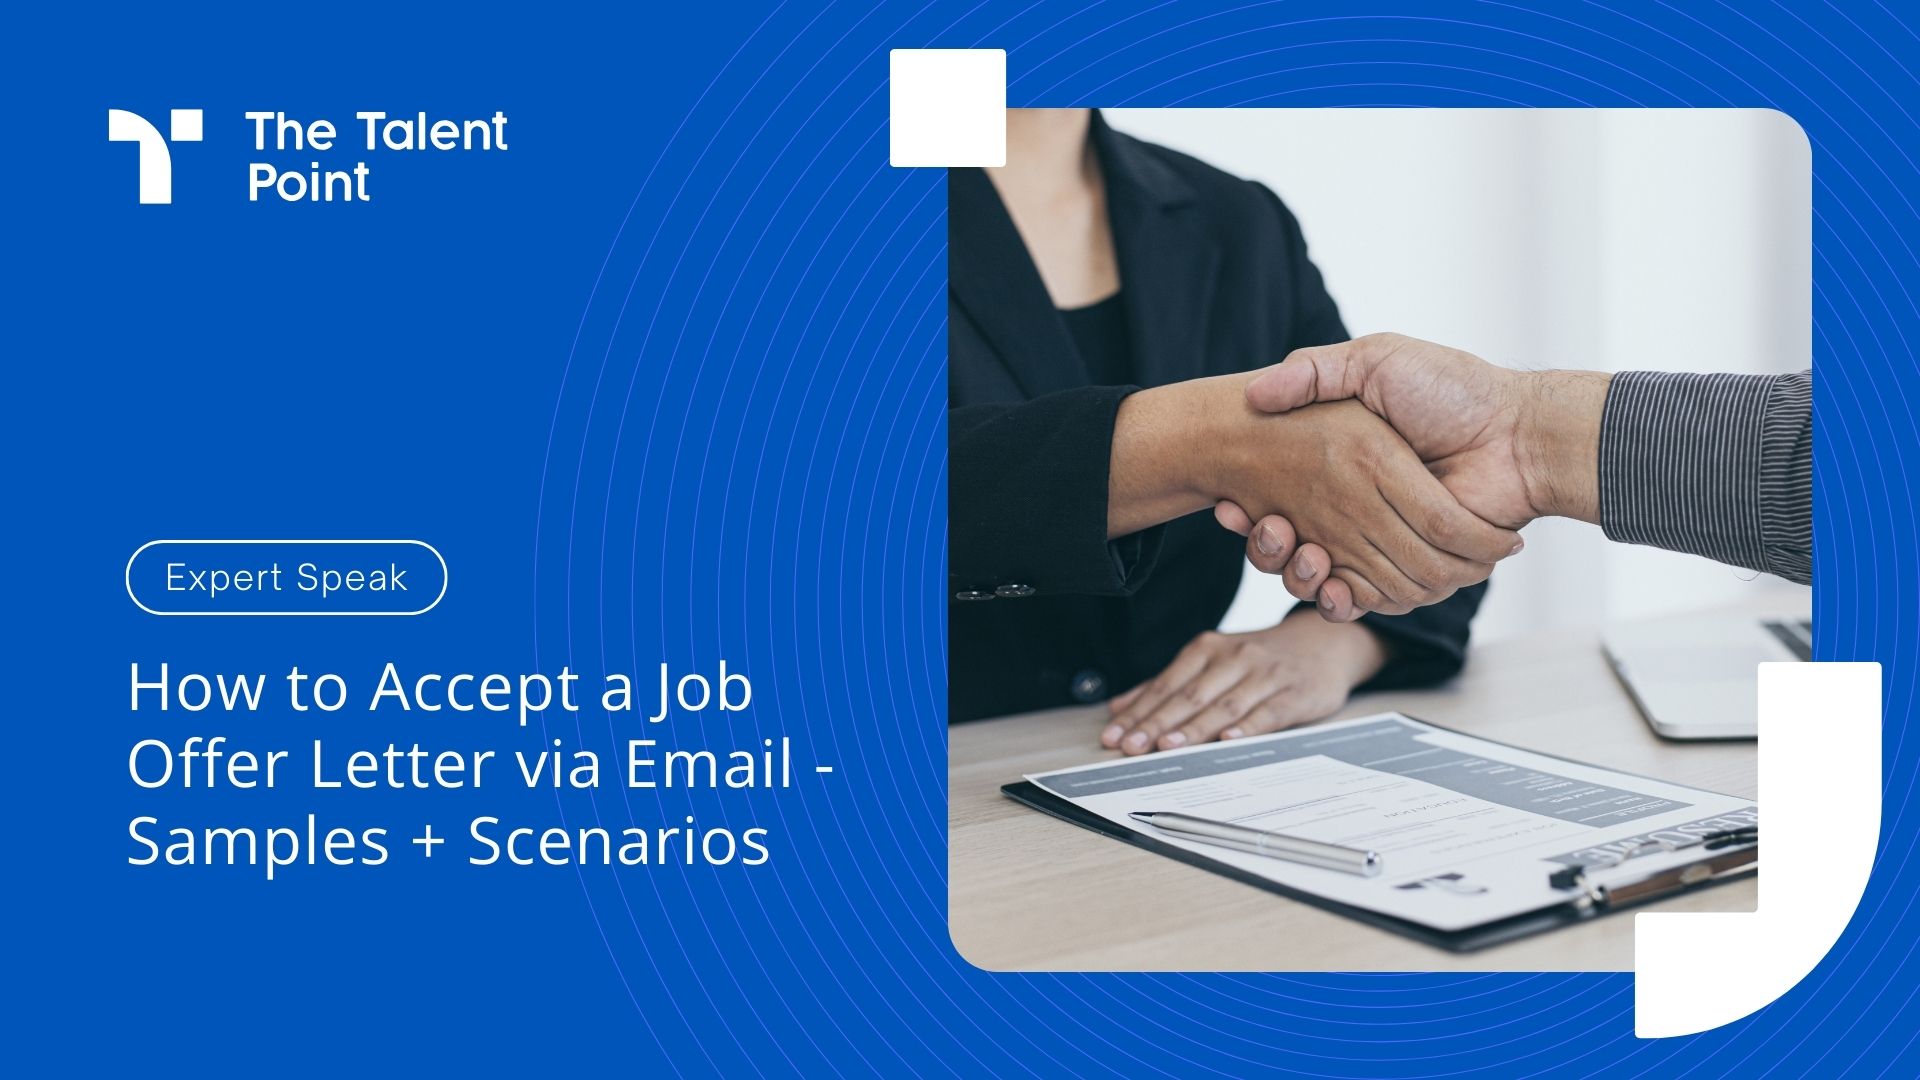 How to Accept a Job Offer Letter via Email - Samples + Scenarios - TalentPoint